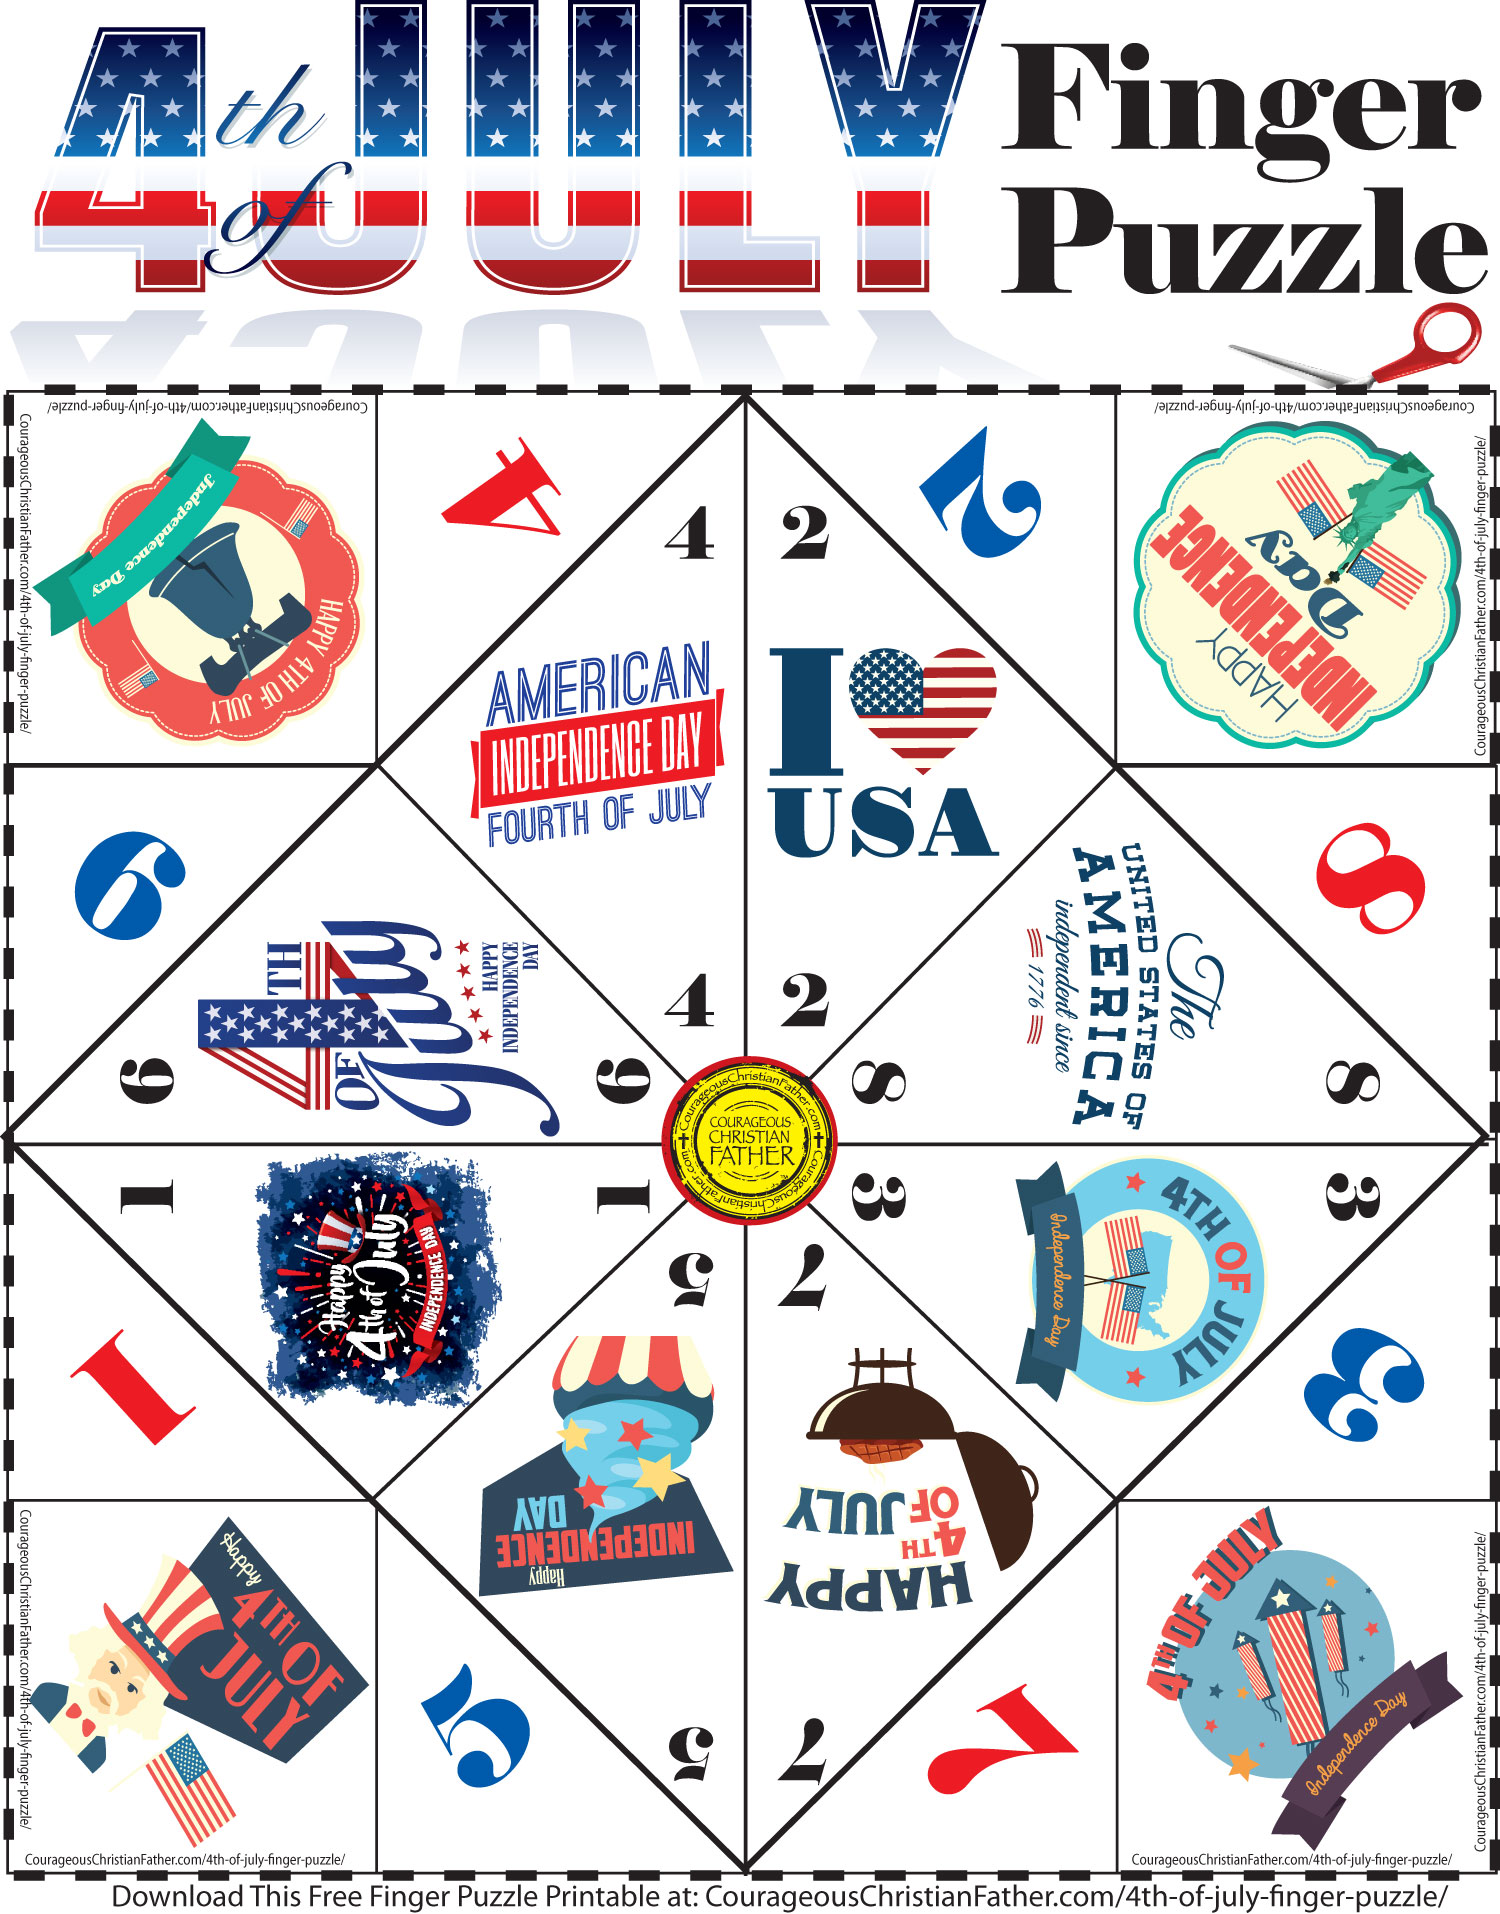 4th of July Finger Puzzle Printable - Here is a fun free finger puzzle printable for Independence Day (4th of July). #4thofJuly #IndependenceDay 